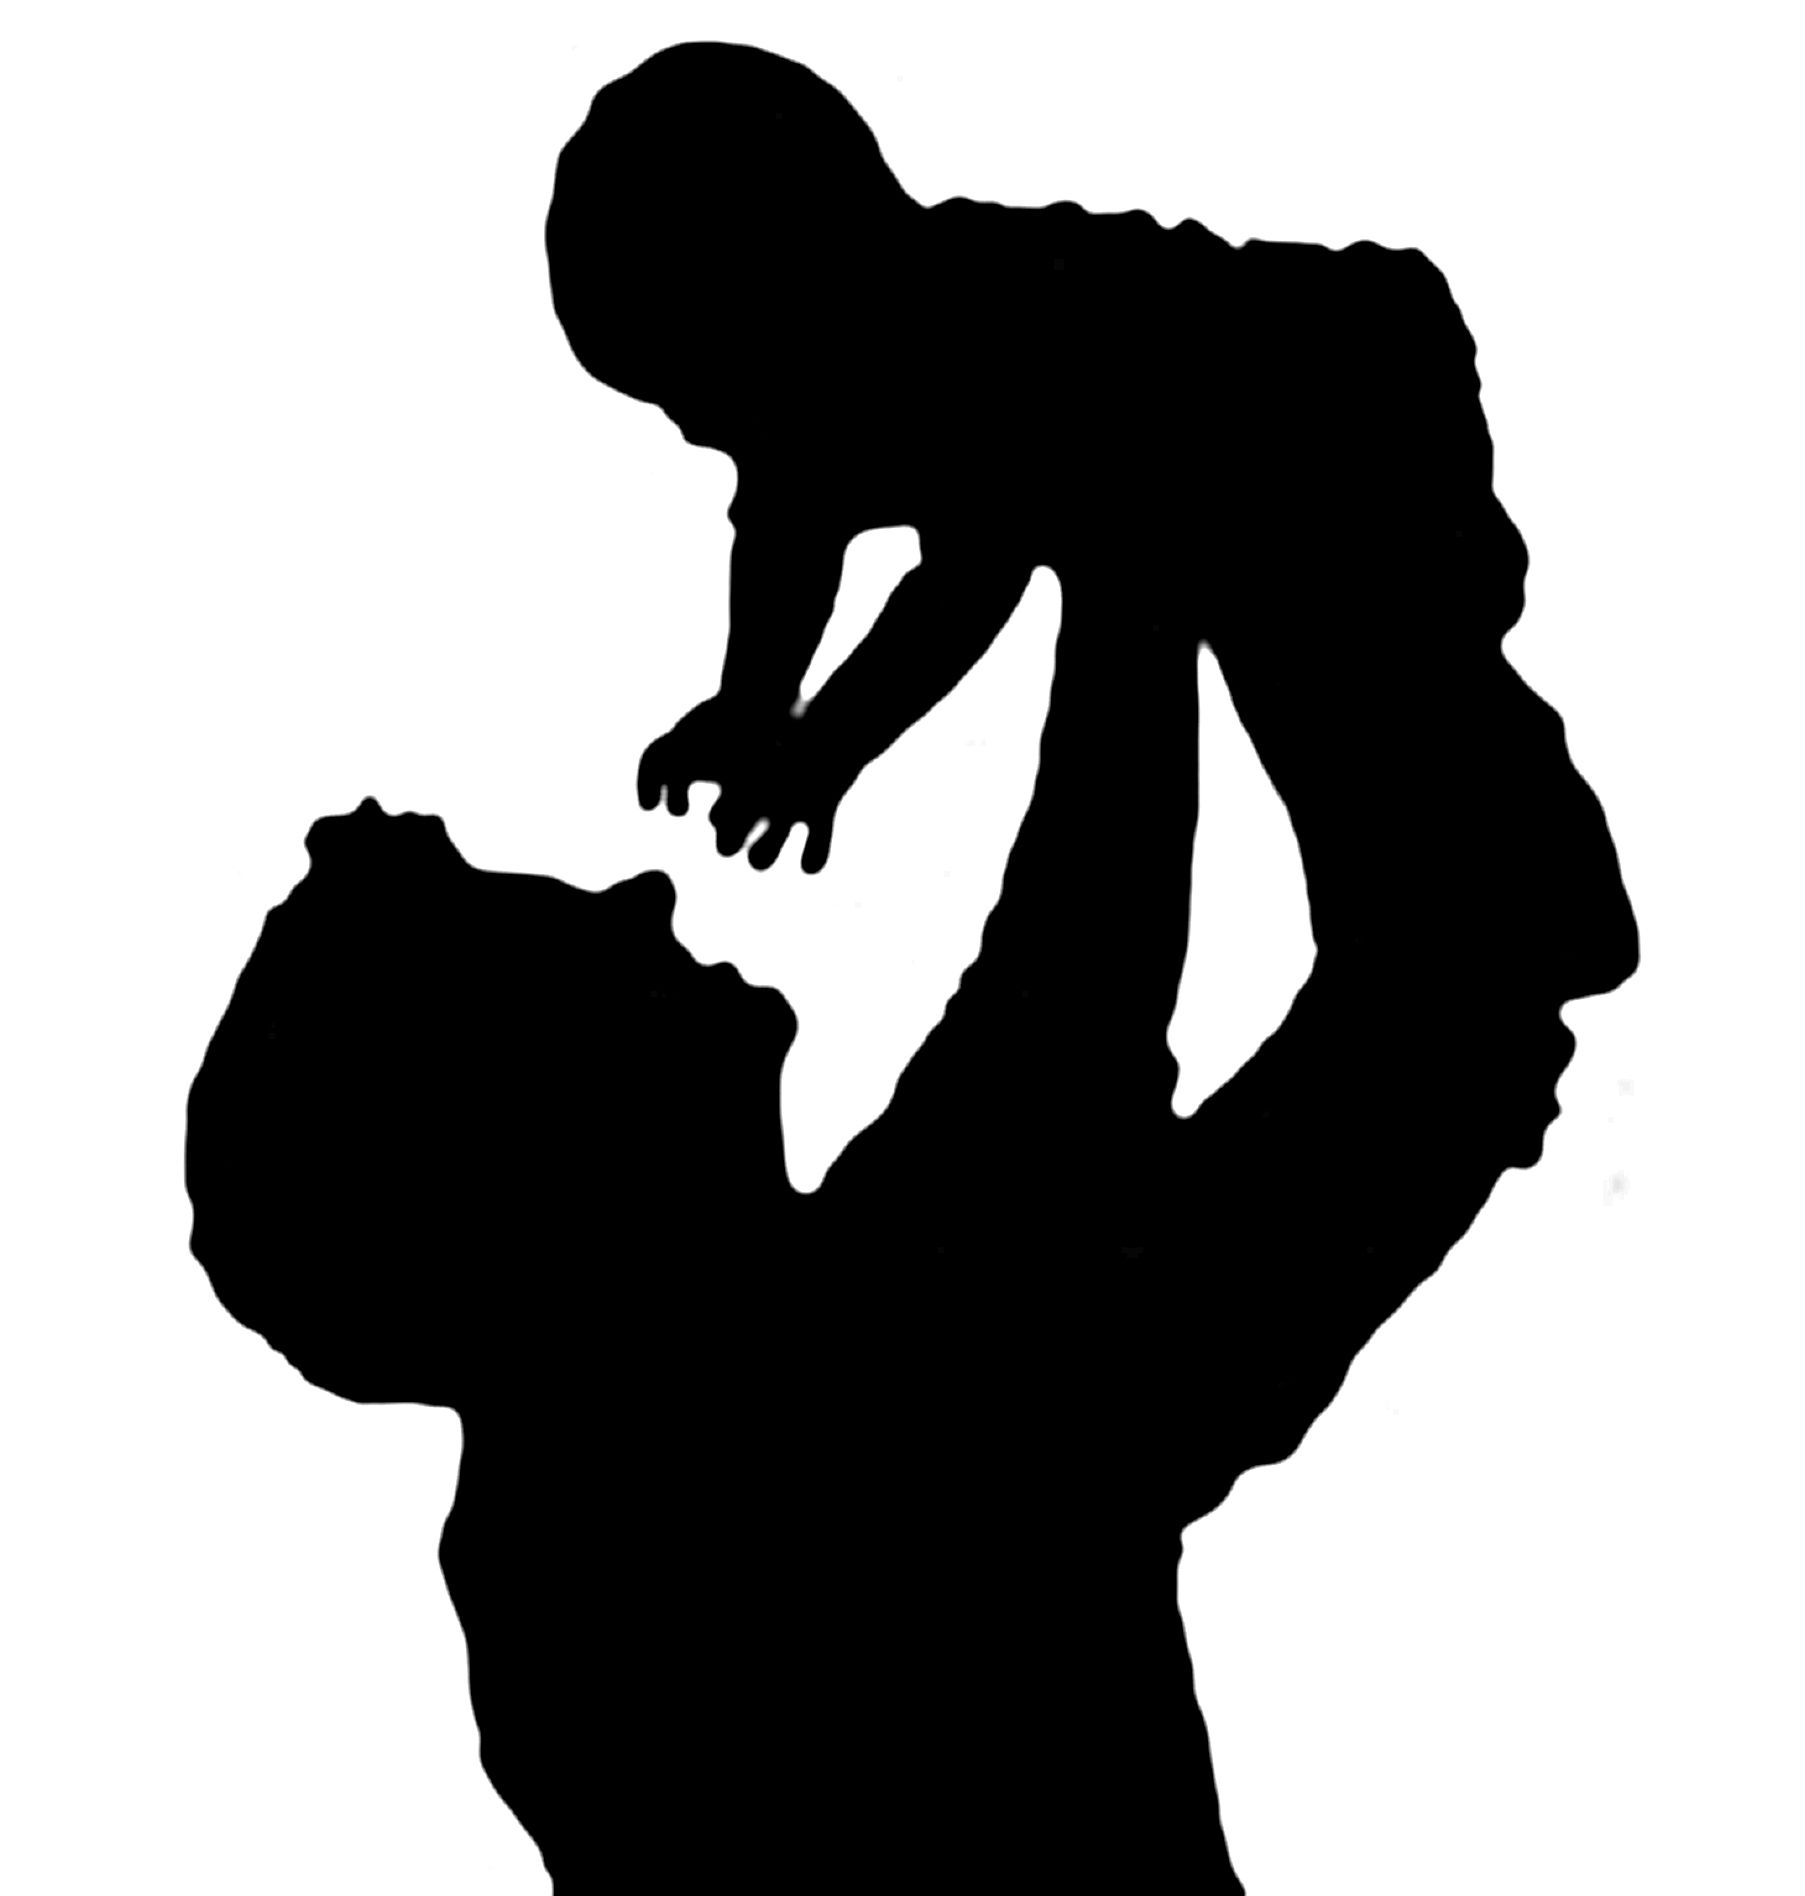 Silhouette of a father holding his child | Art | Pinterest ...